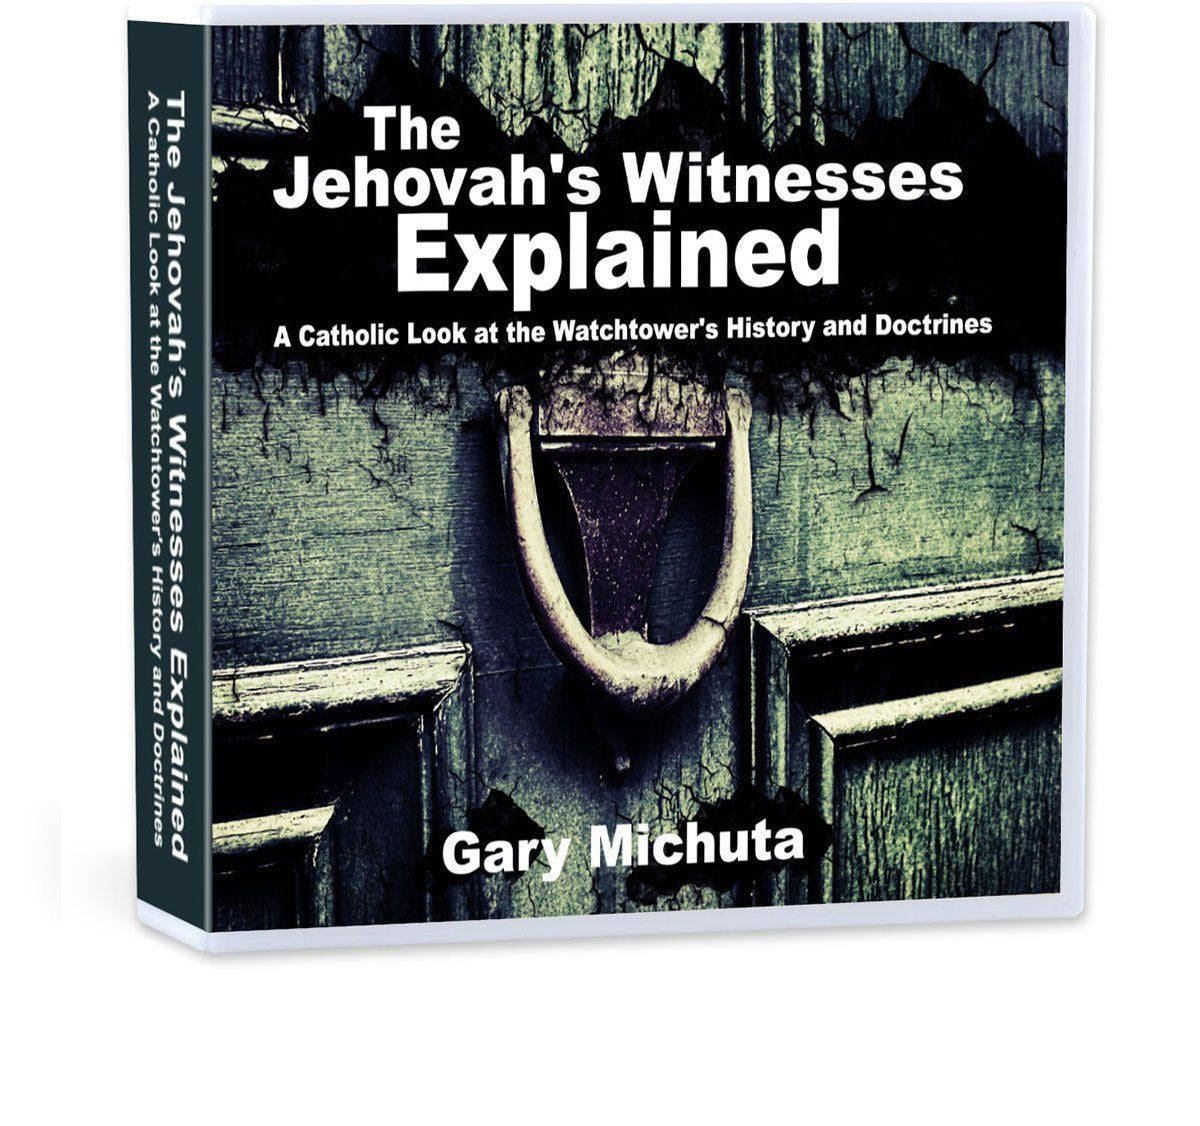 Learn the History and theology behind the Watchtower Jehovah's Witnesses with Catholic apologist Gary Michuta (CD).